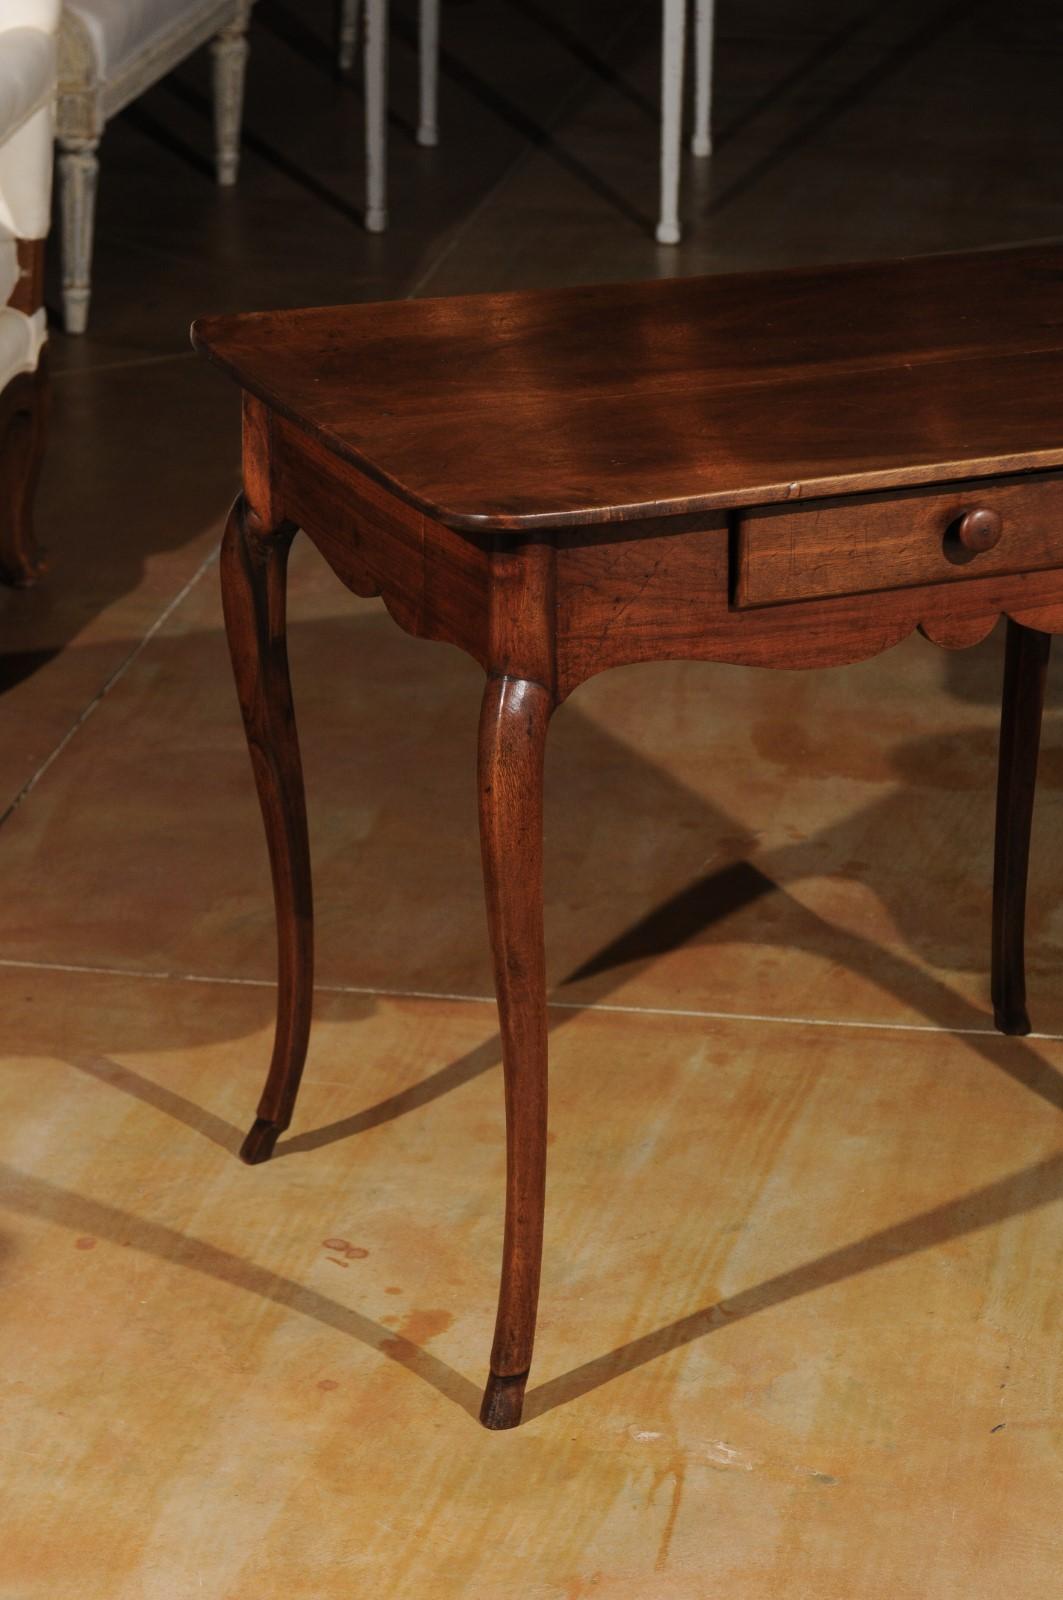 18th Century French 1750s Louis XV Walnut Table with Acacia Legs from the Rhône Valley